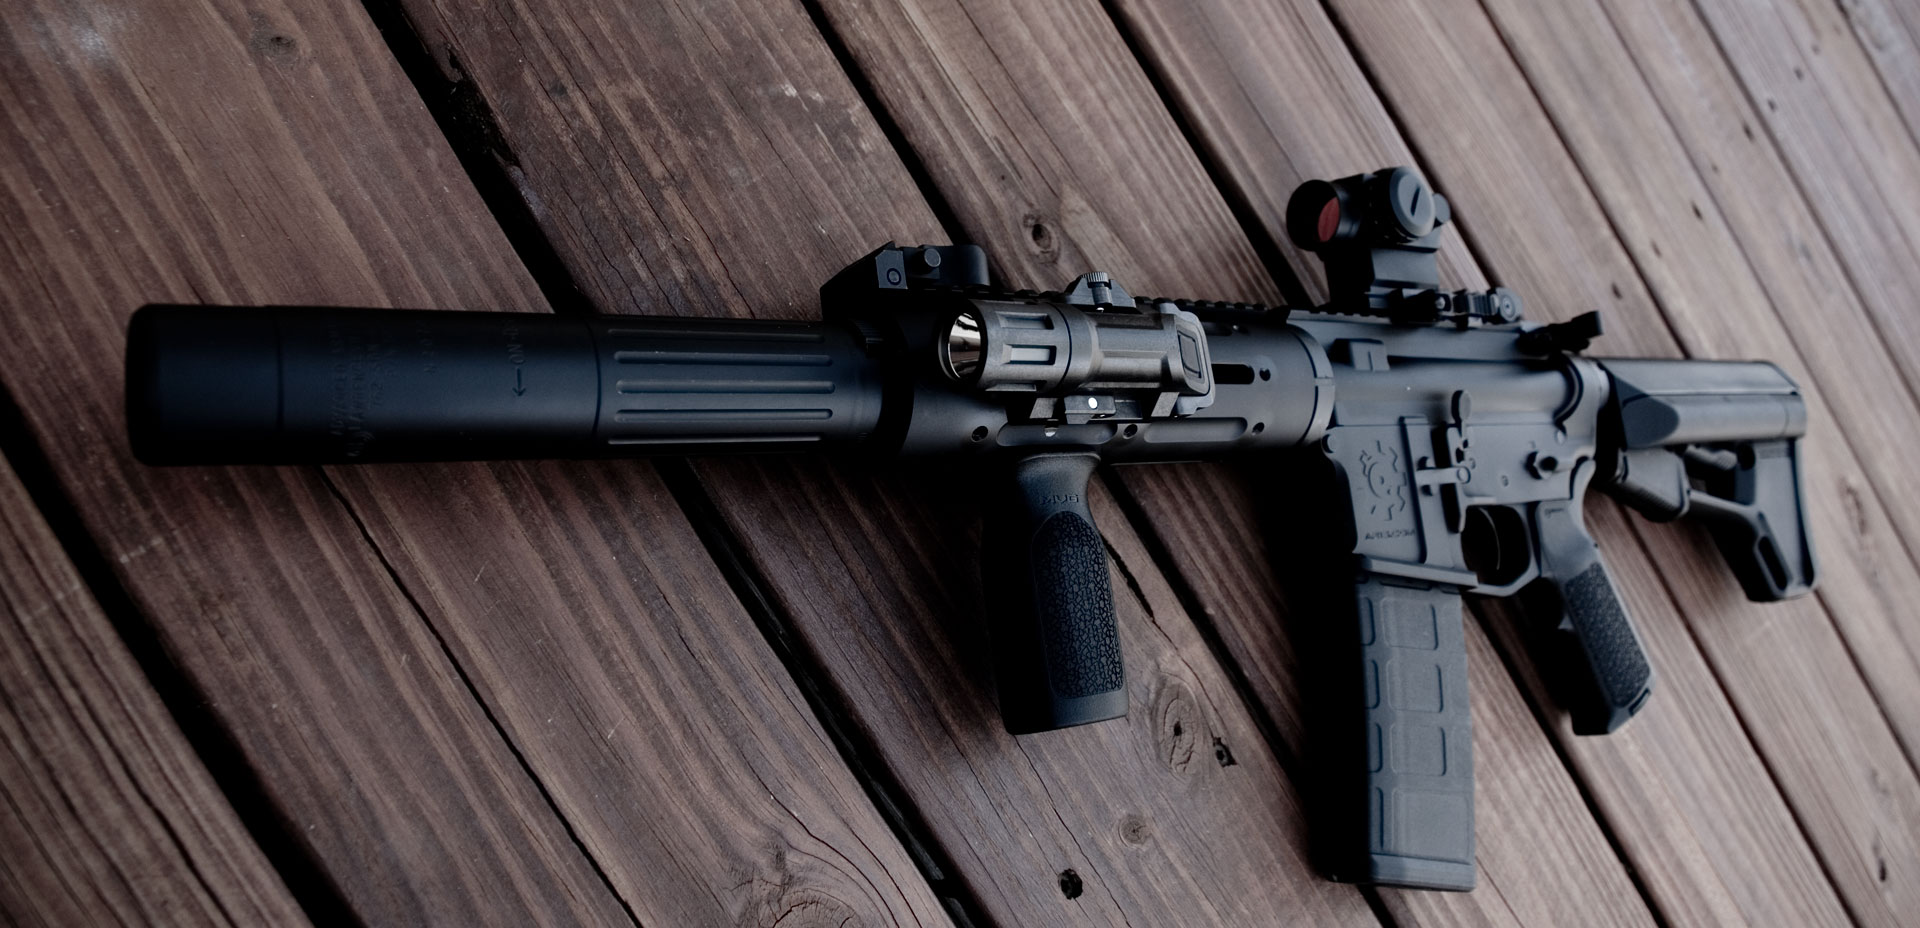 Recommend Me A Suppressor For My Sbr Page 2 AR15COM.